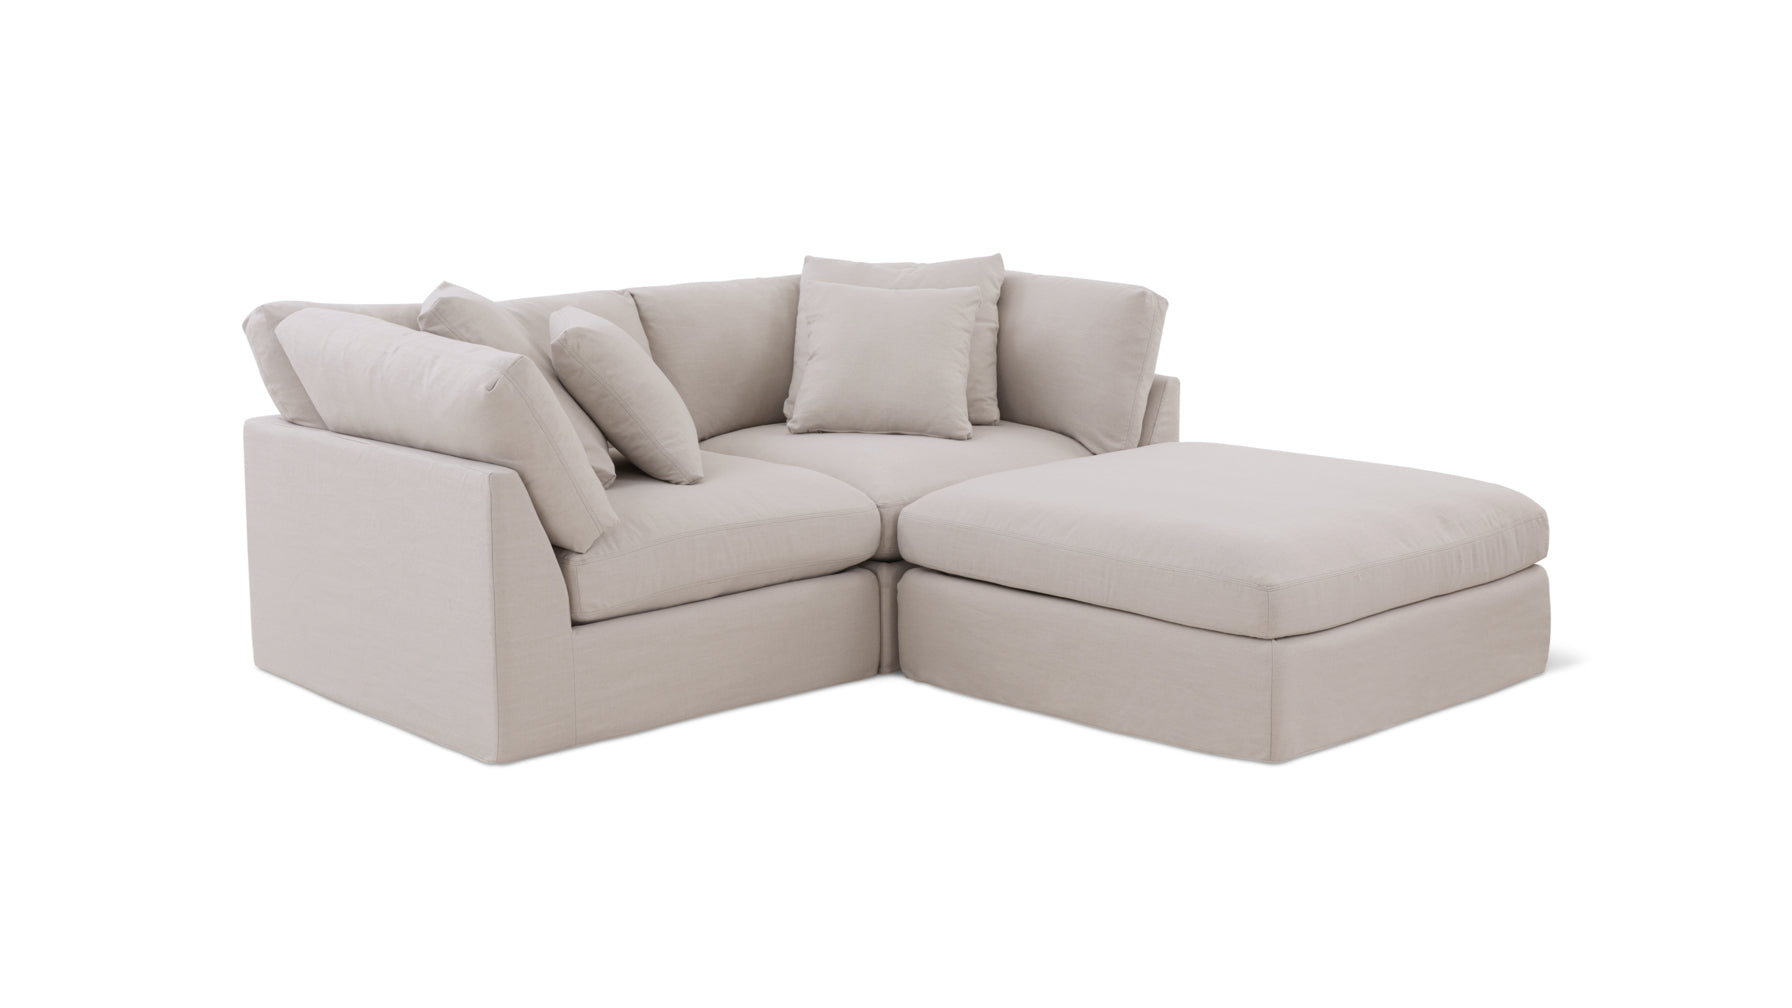 Get Together™ 3-Piece Modular Sectional, Large, Clay - Image 3